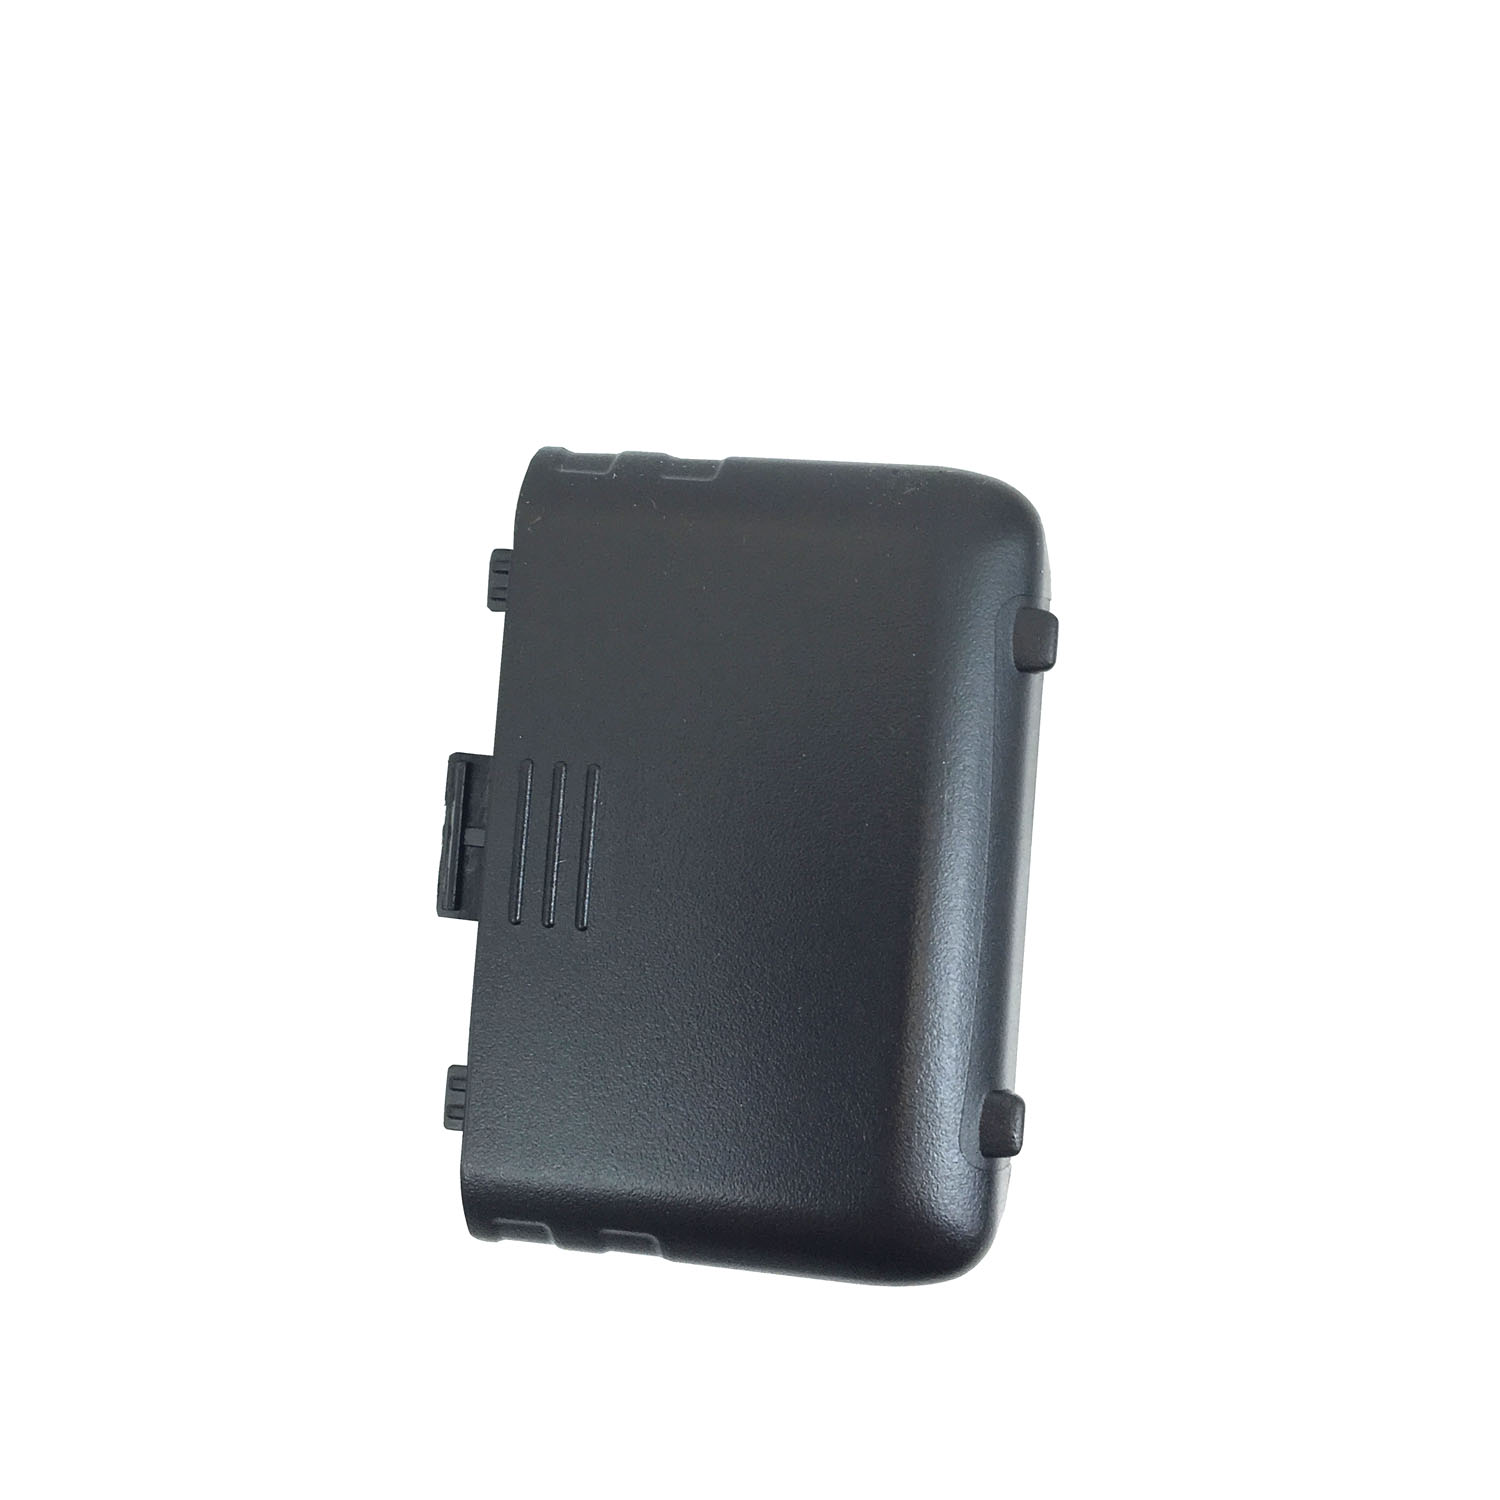 UNIDEN - GBT102611ZZ DIRECT REPLACEMENT BATTERY COVER FOR BC125AT SCANNER